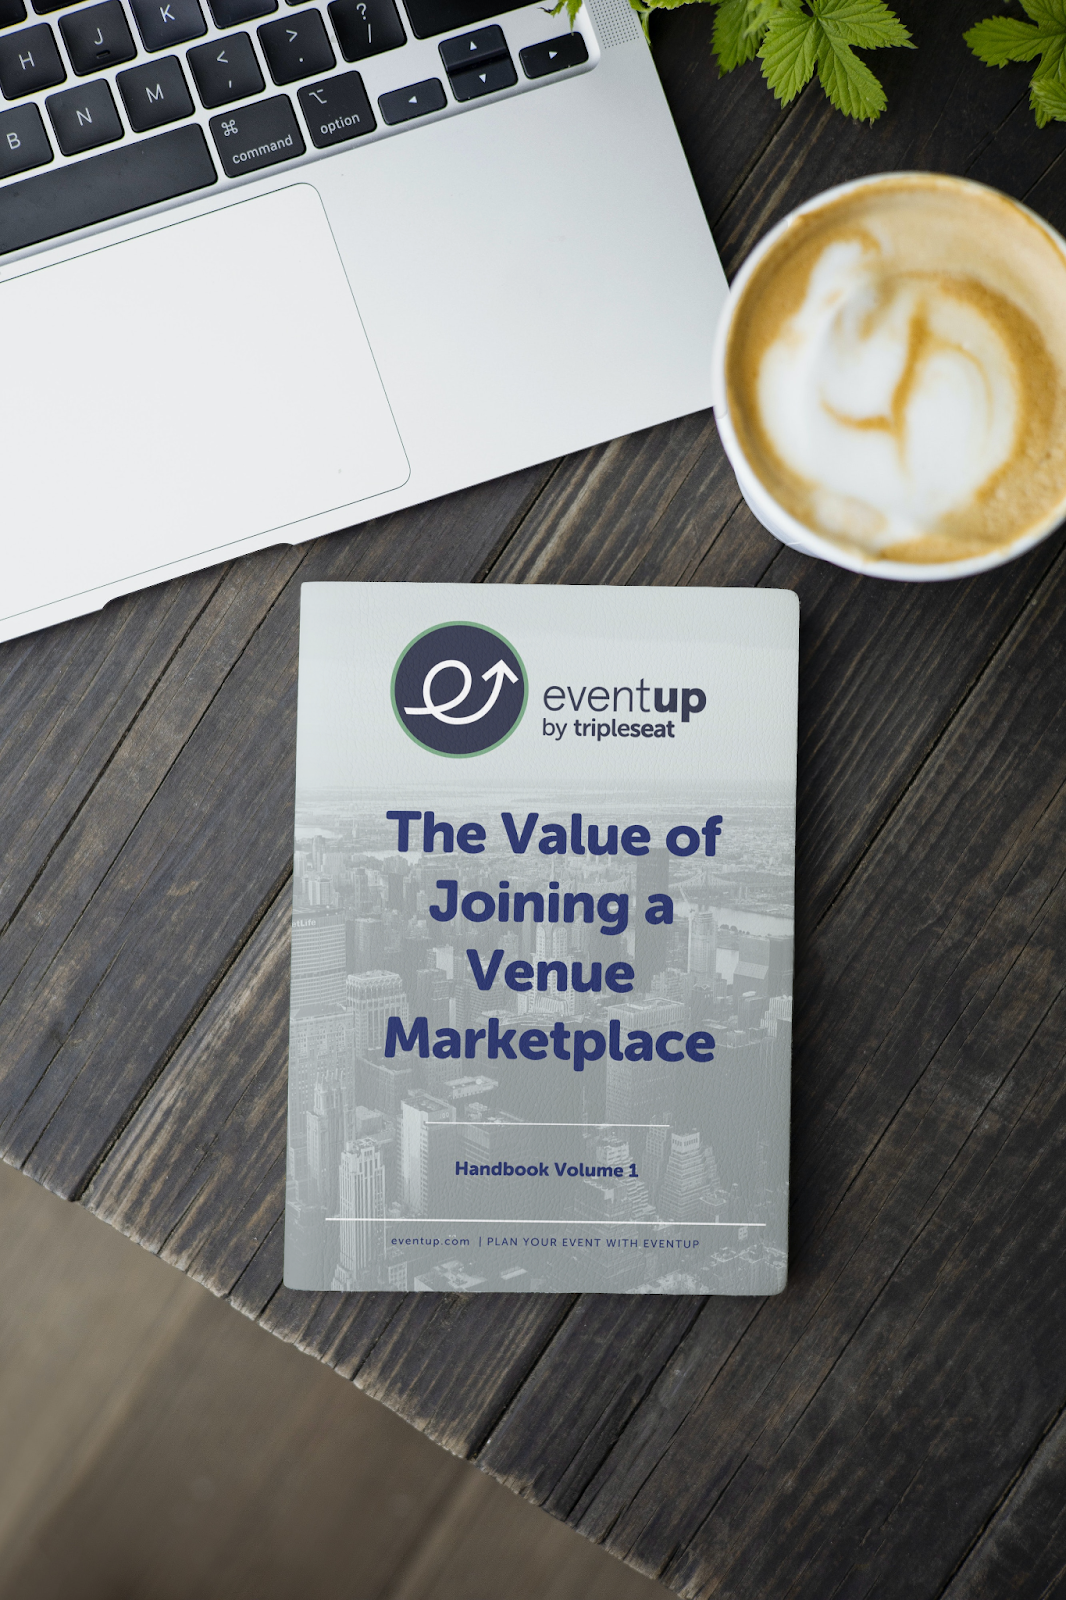 Why your venue should join a marketplace